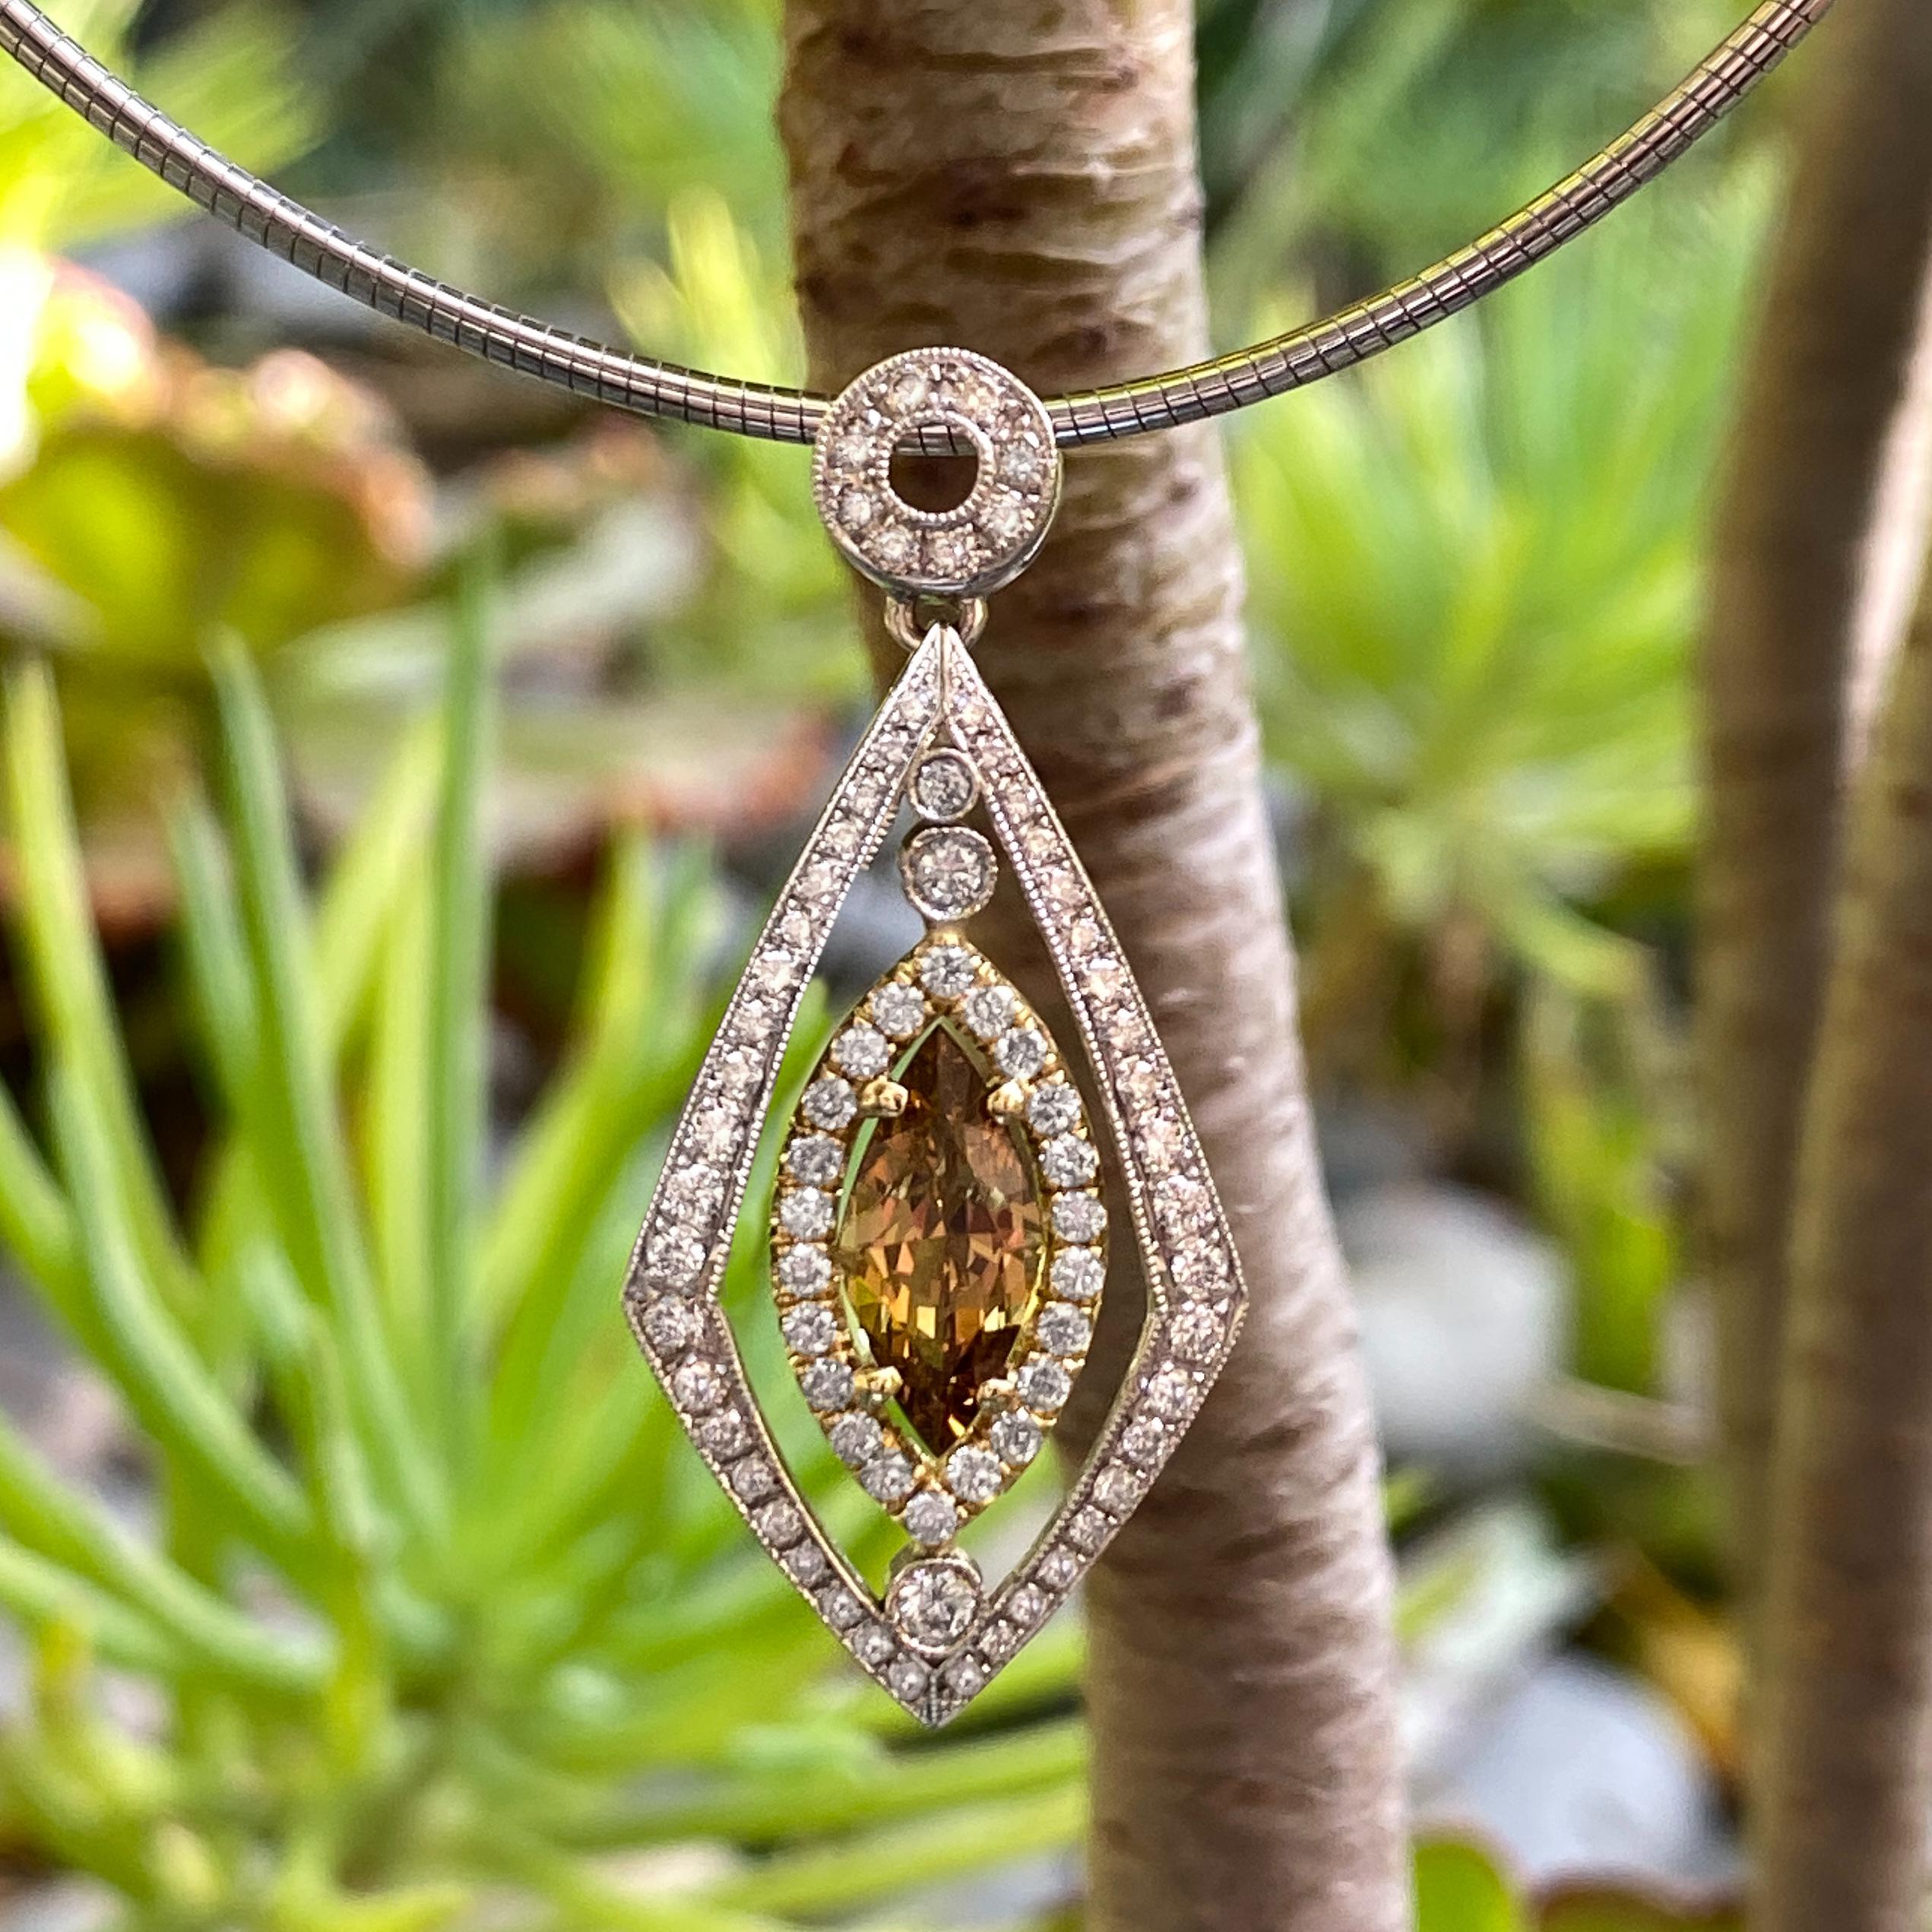 This gorgeous, sexy and modern pendant by Eytan Brandes features a 1.58 carat chrysoberyl floating in a navette-shaped frame of diamonds.

The Madagascar chrysoberyl, in a rich shade of root beer brown with strong golden yellow undertones, has a